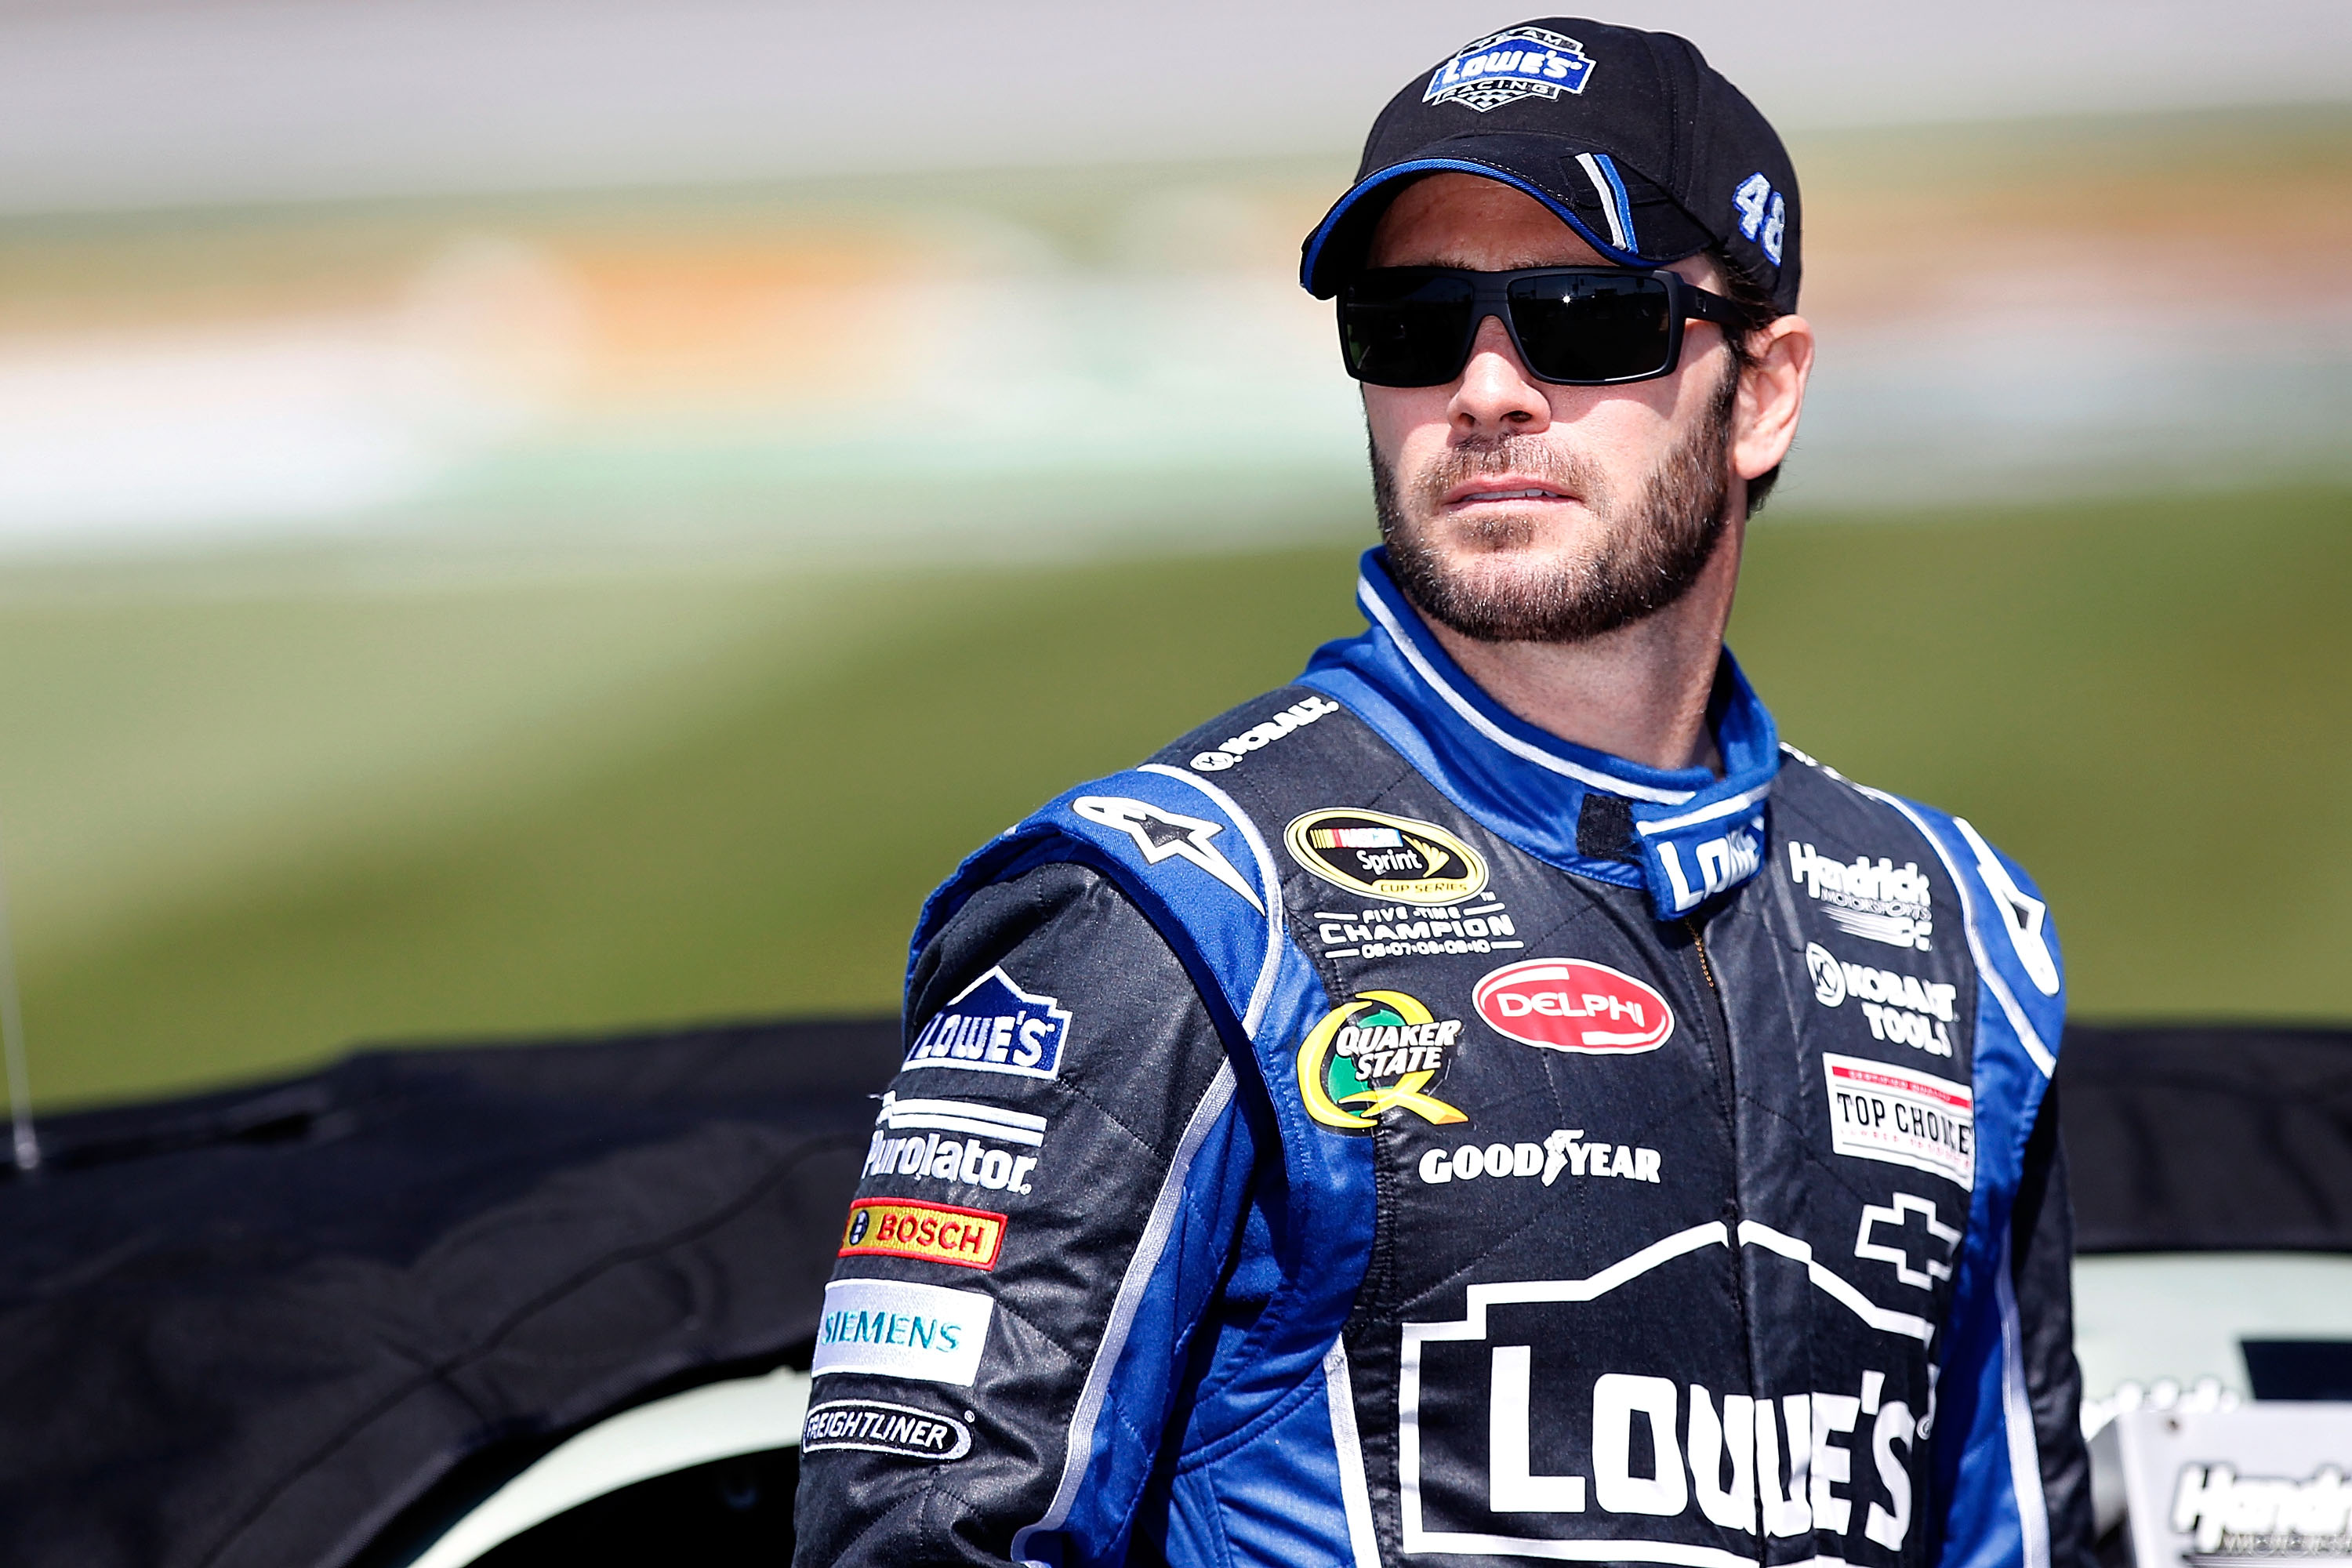 Jimmie Johnson tops Forbes "Most Influential Athlete" list CBS News